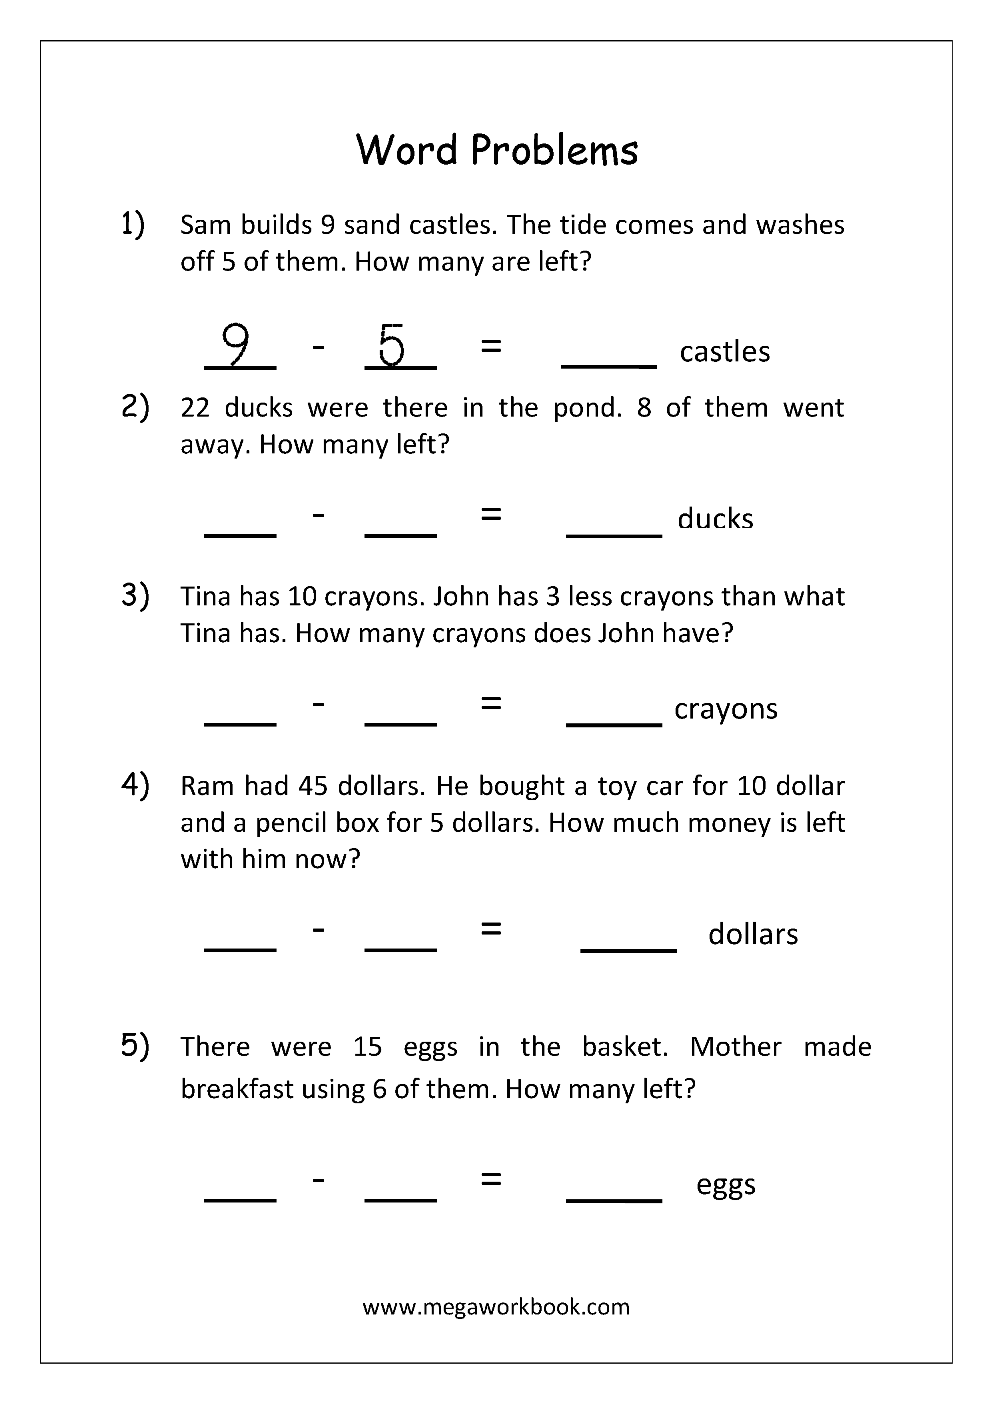 Addition and Subtraction Word Problems Worksheets For Kindergarten and